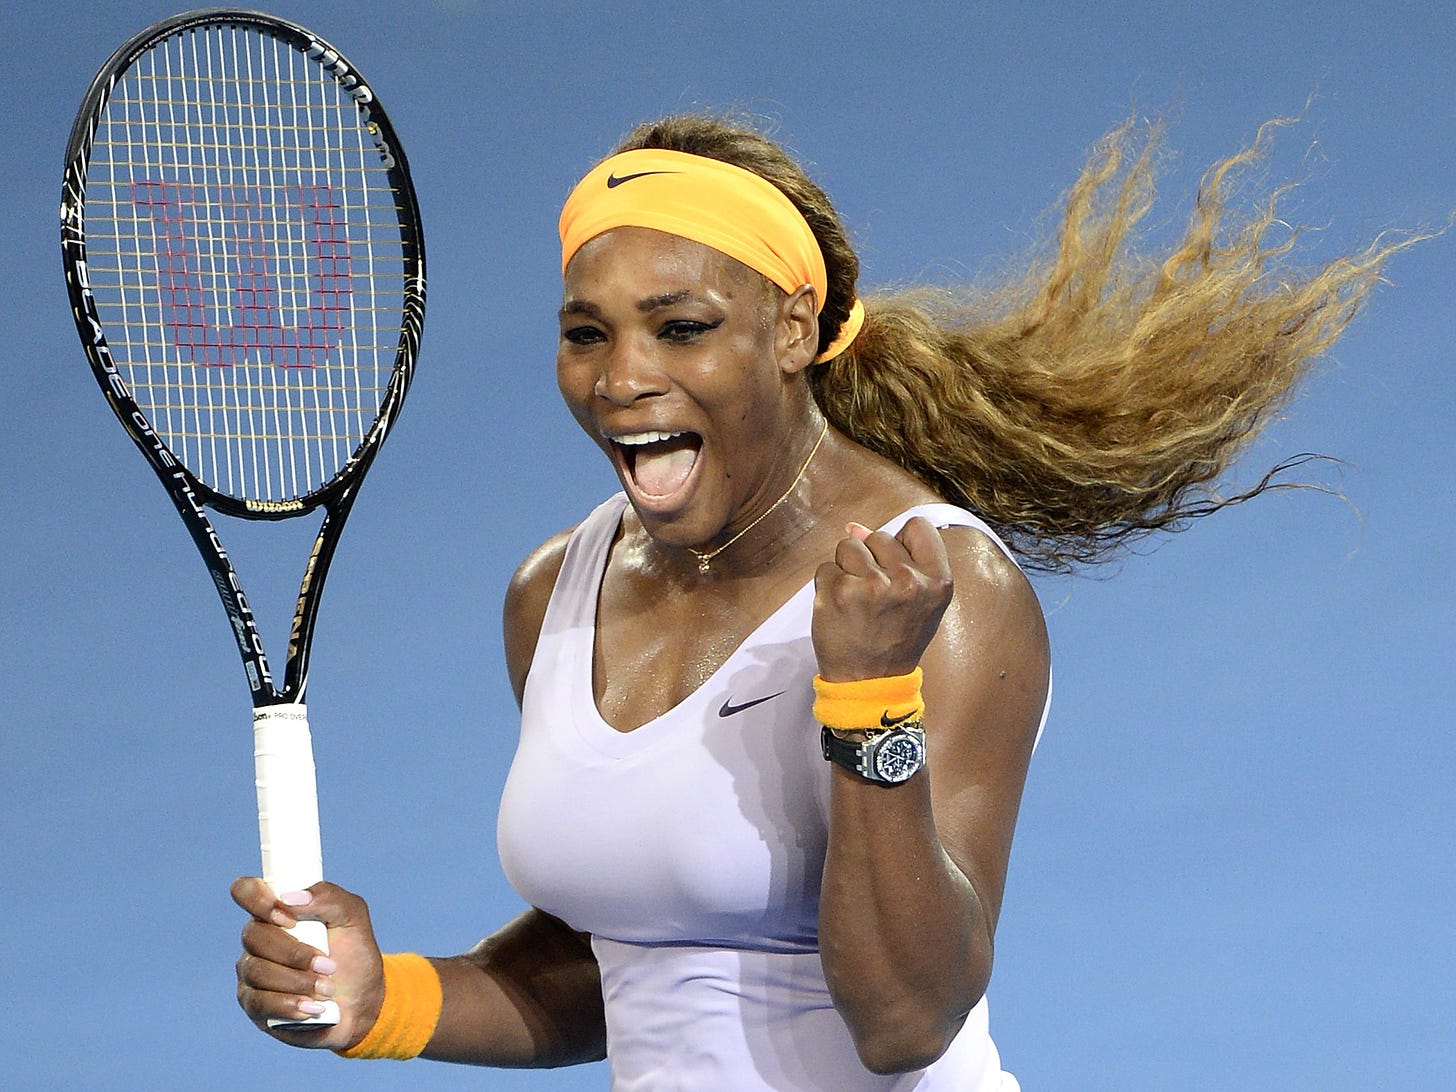 Serena Williams says she intends to retire from tennis after the U.S. Open  : NPR